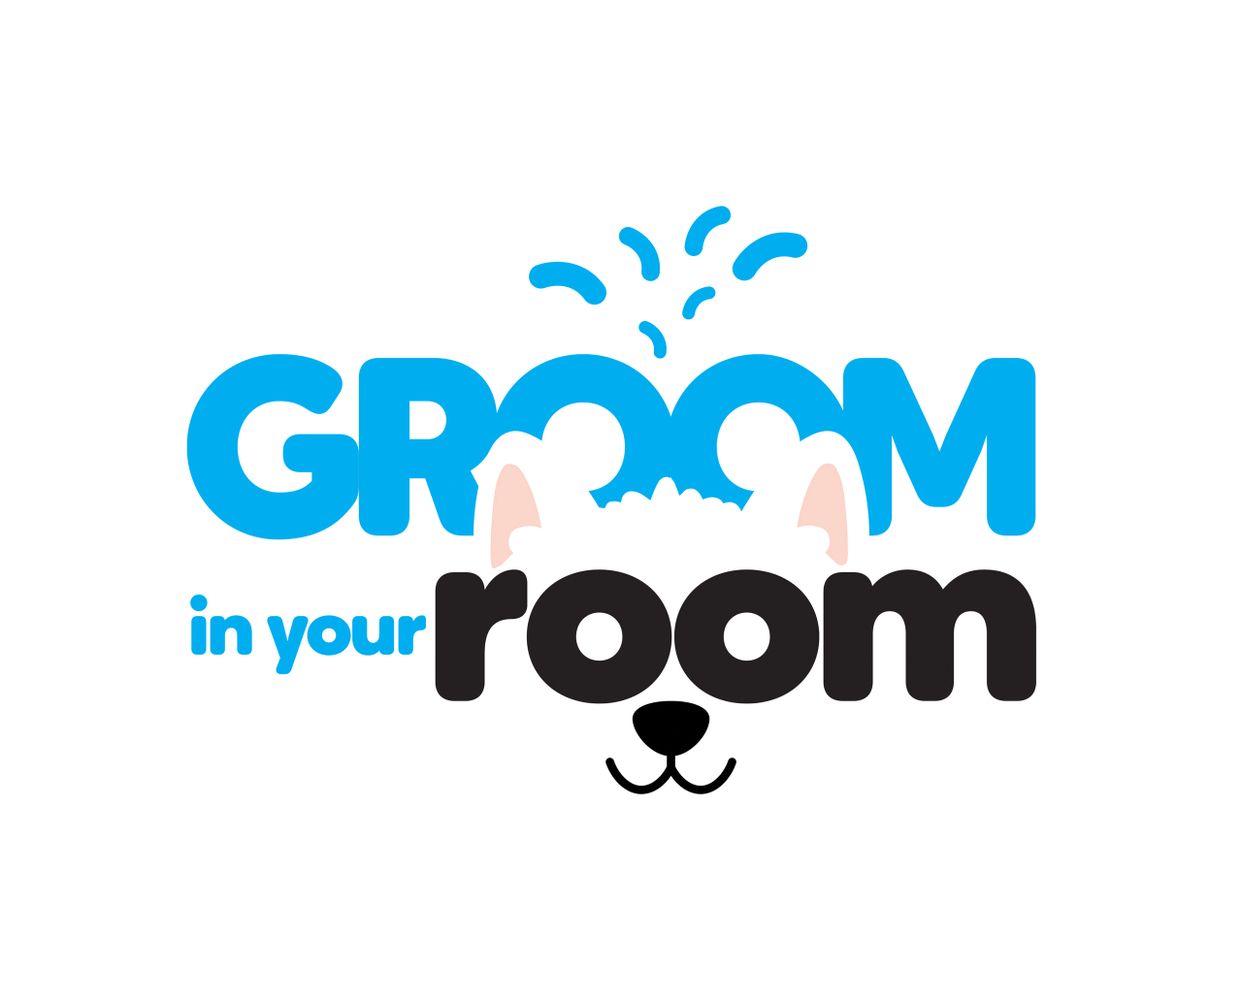 Name of company with a dog's face comprising part of the image. 